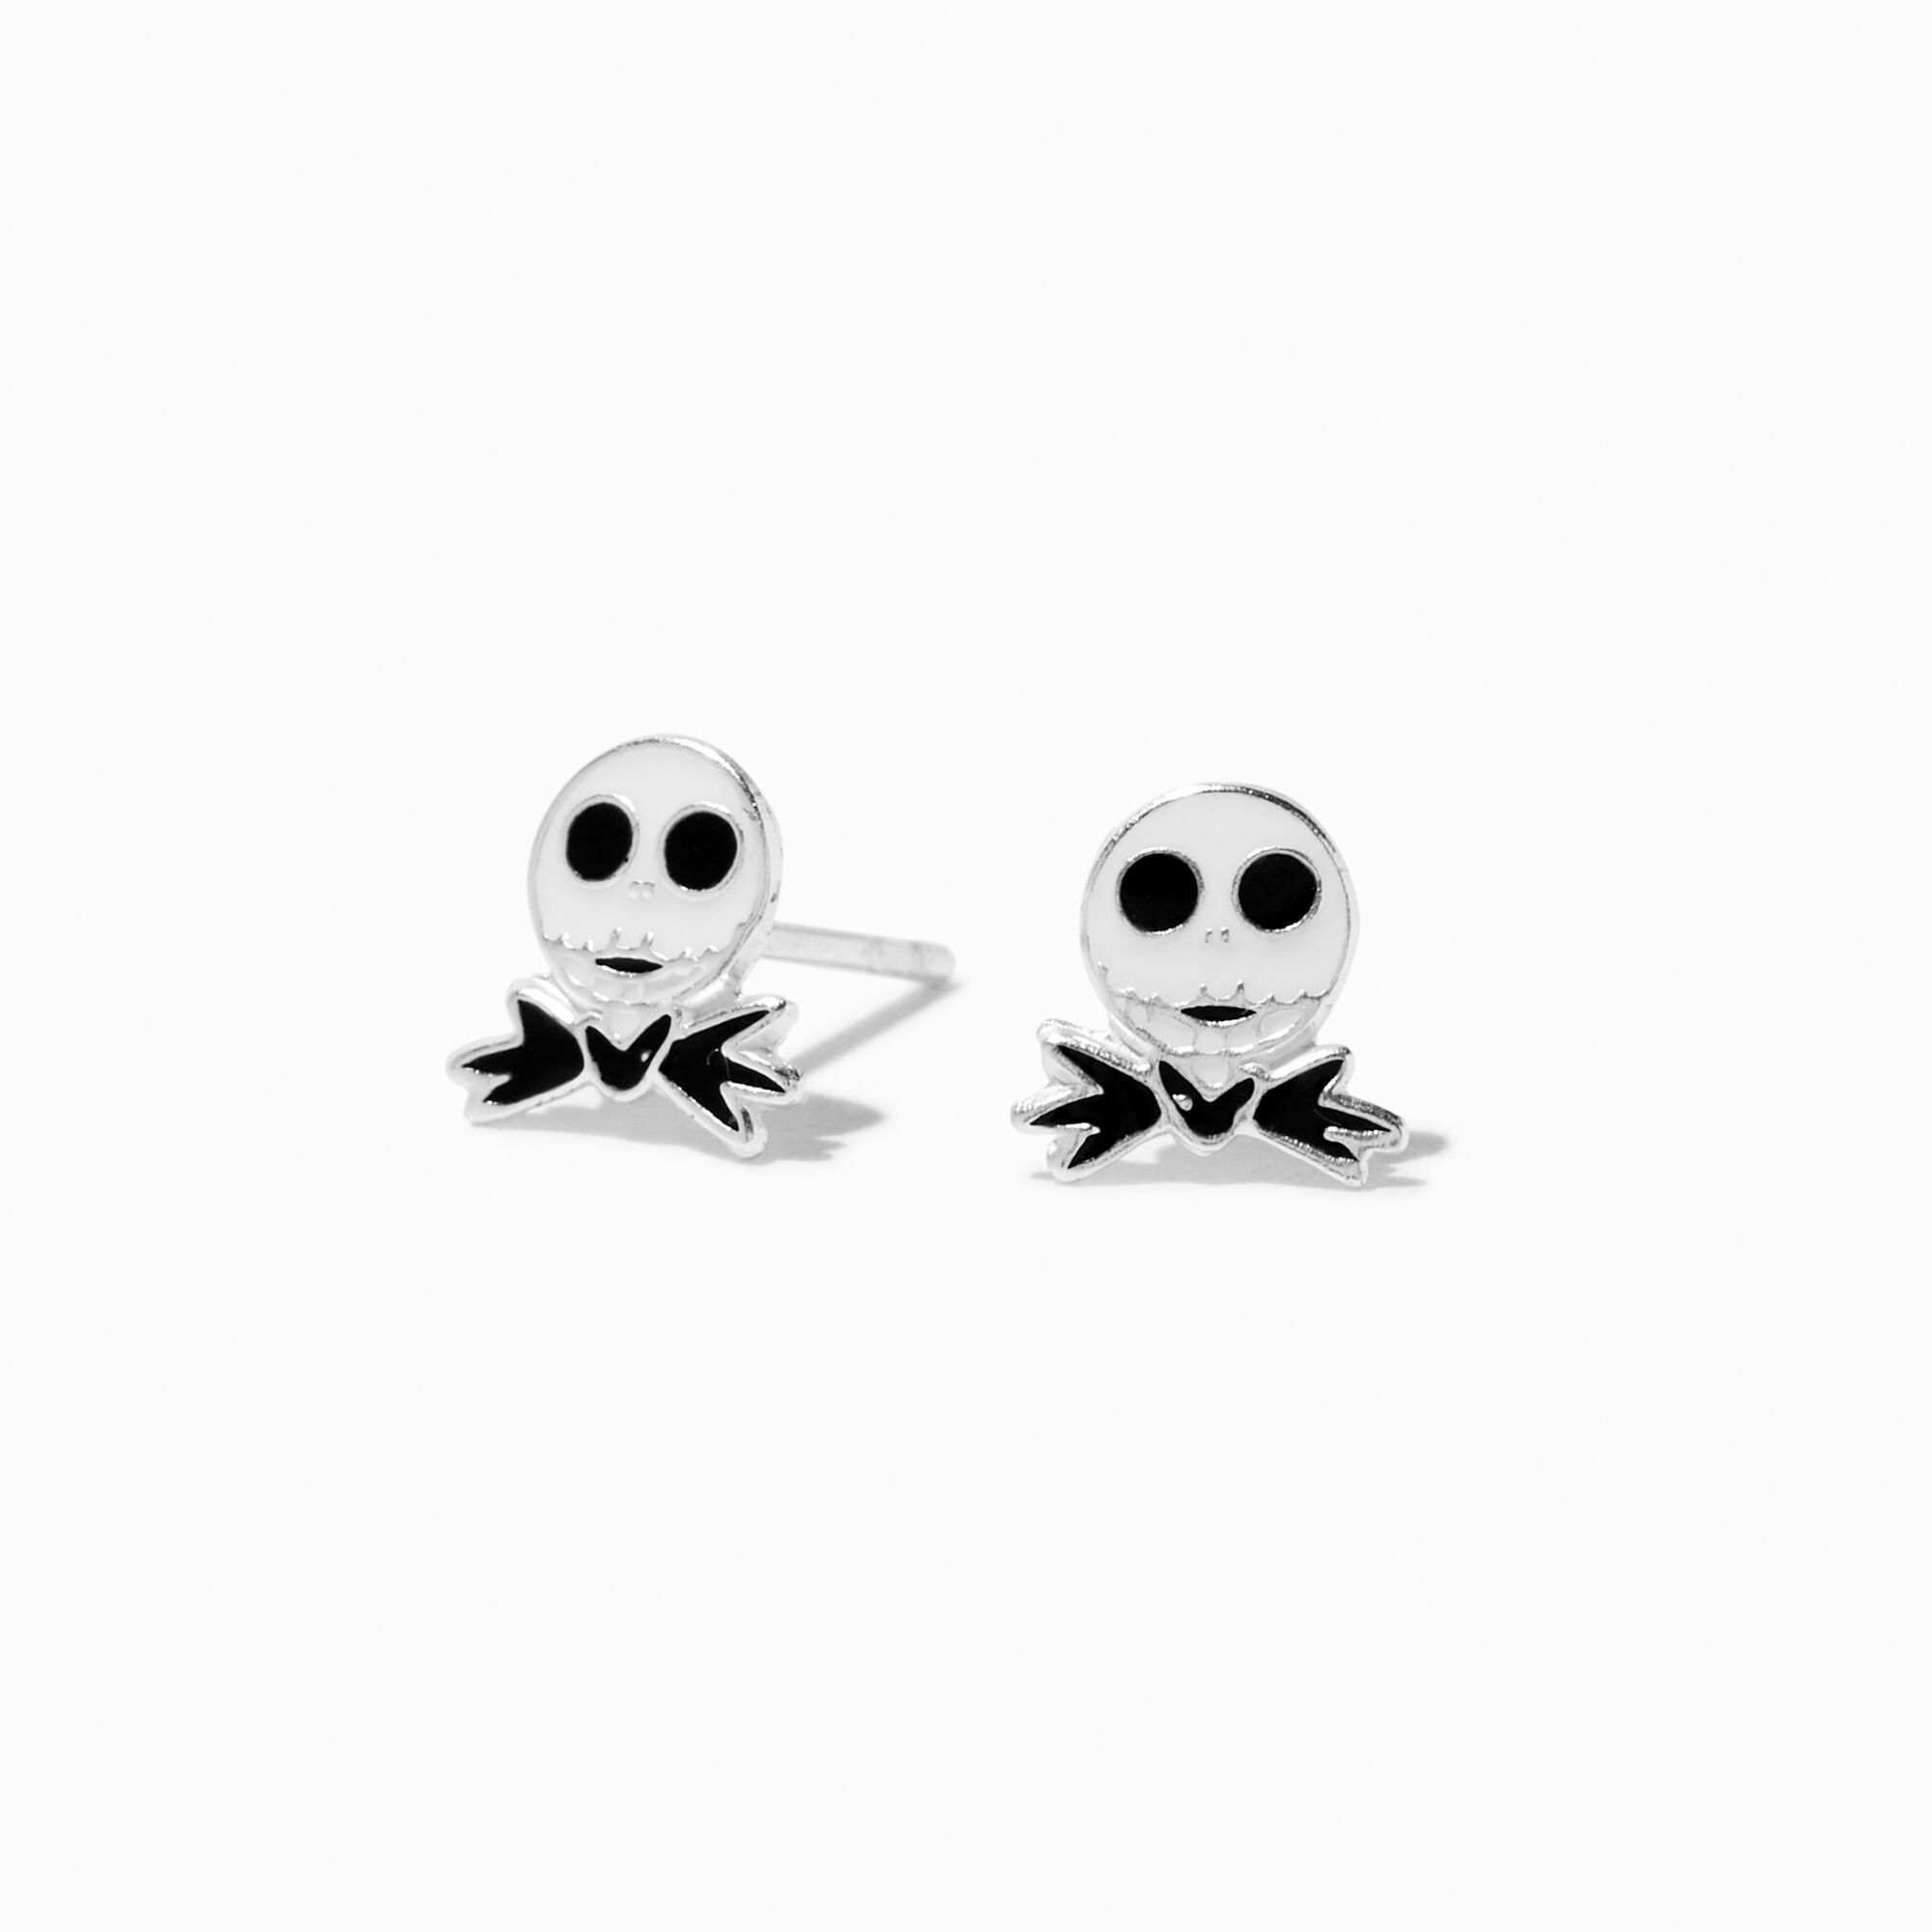 View Claires The Nightmare Before Christmas Jack Skellington Stud Earrings Silver information